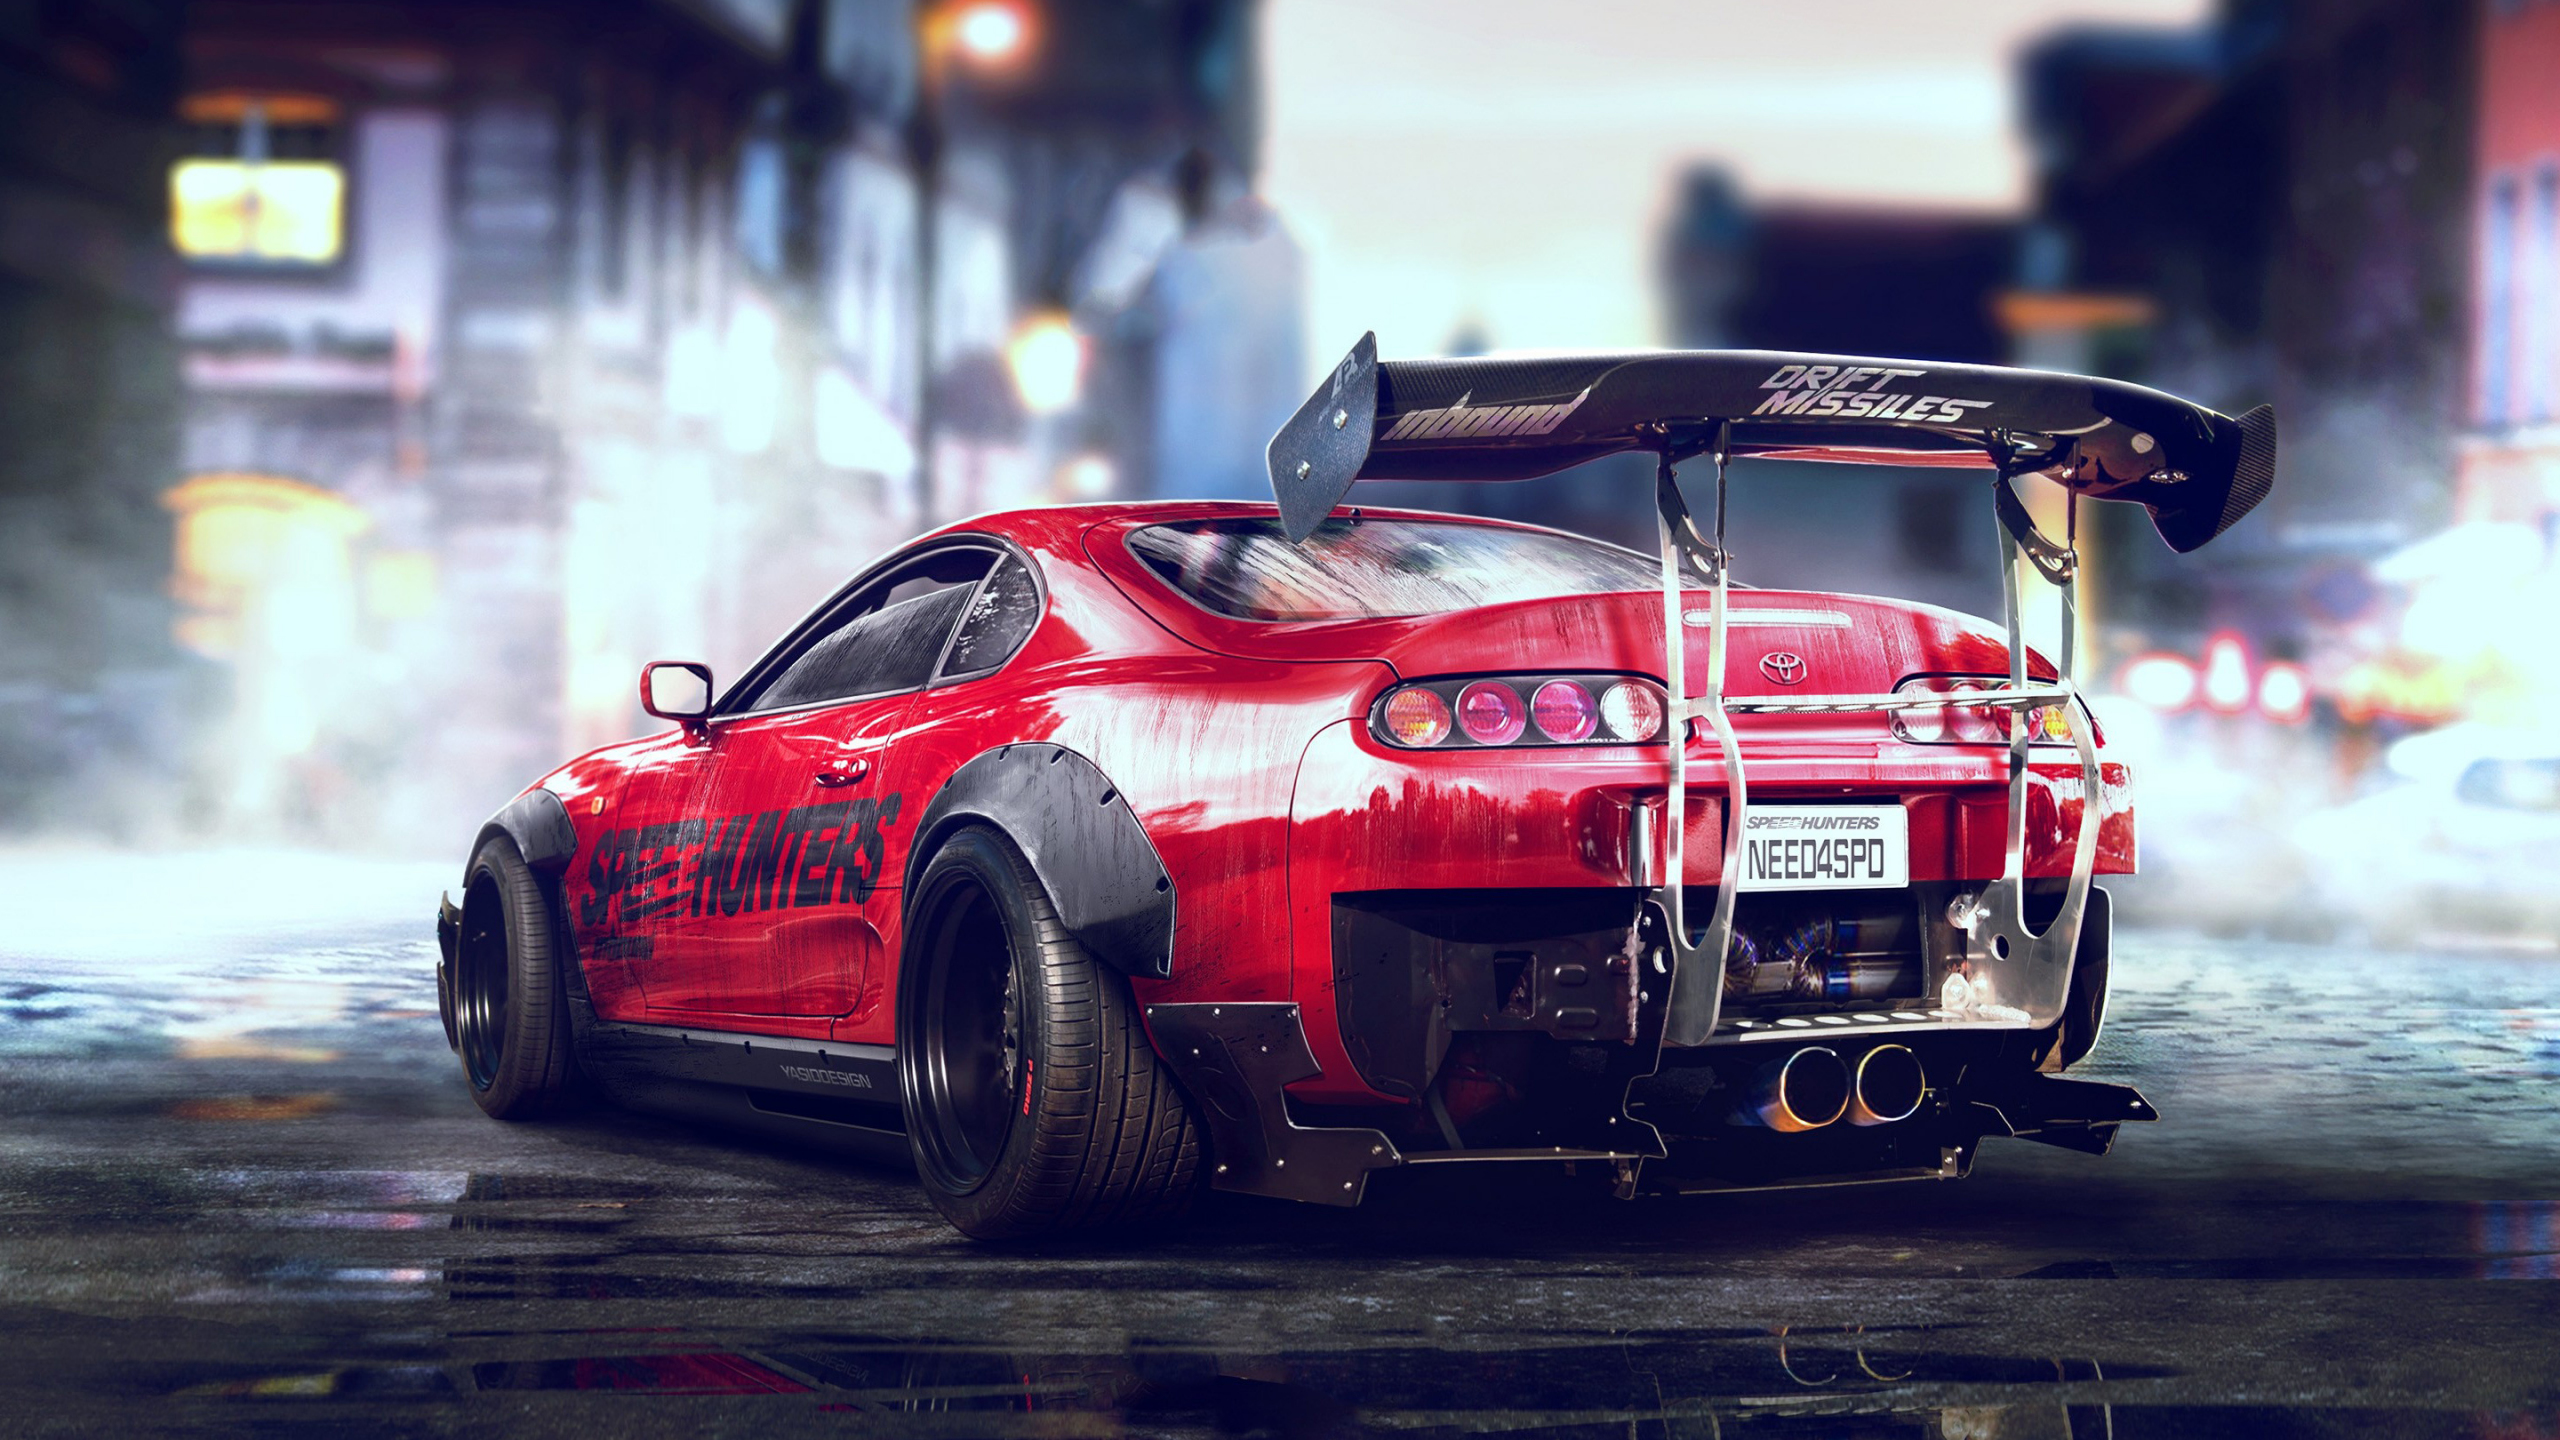 Need for Speed Payback Wallpapers